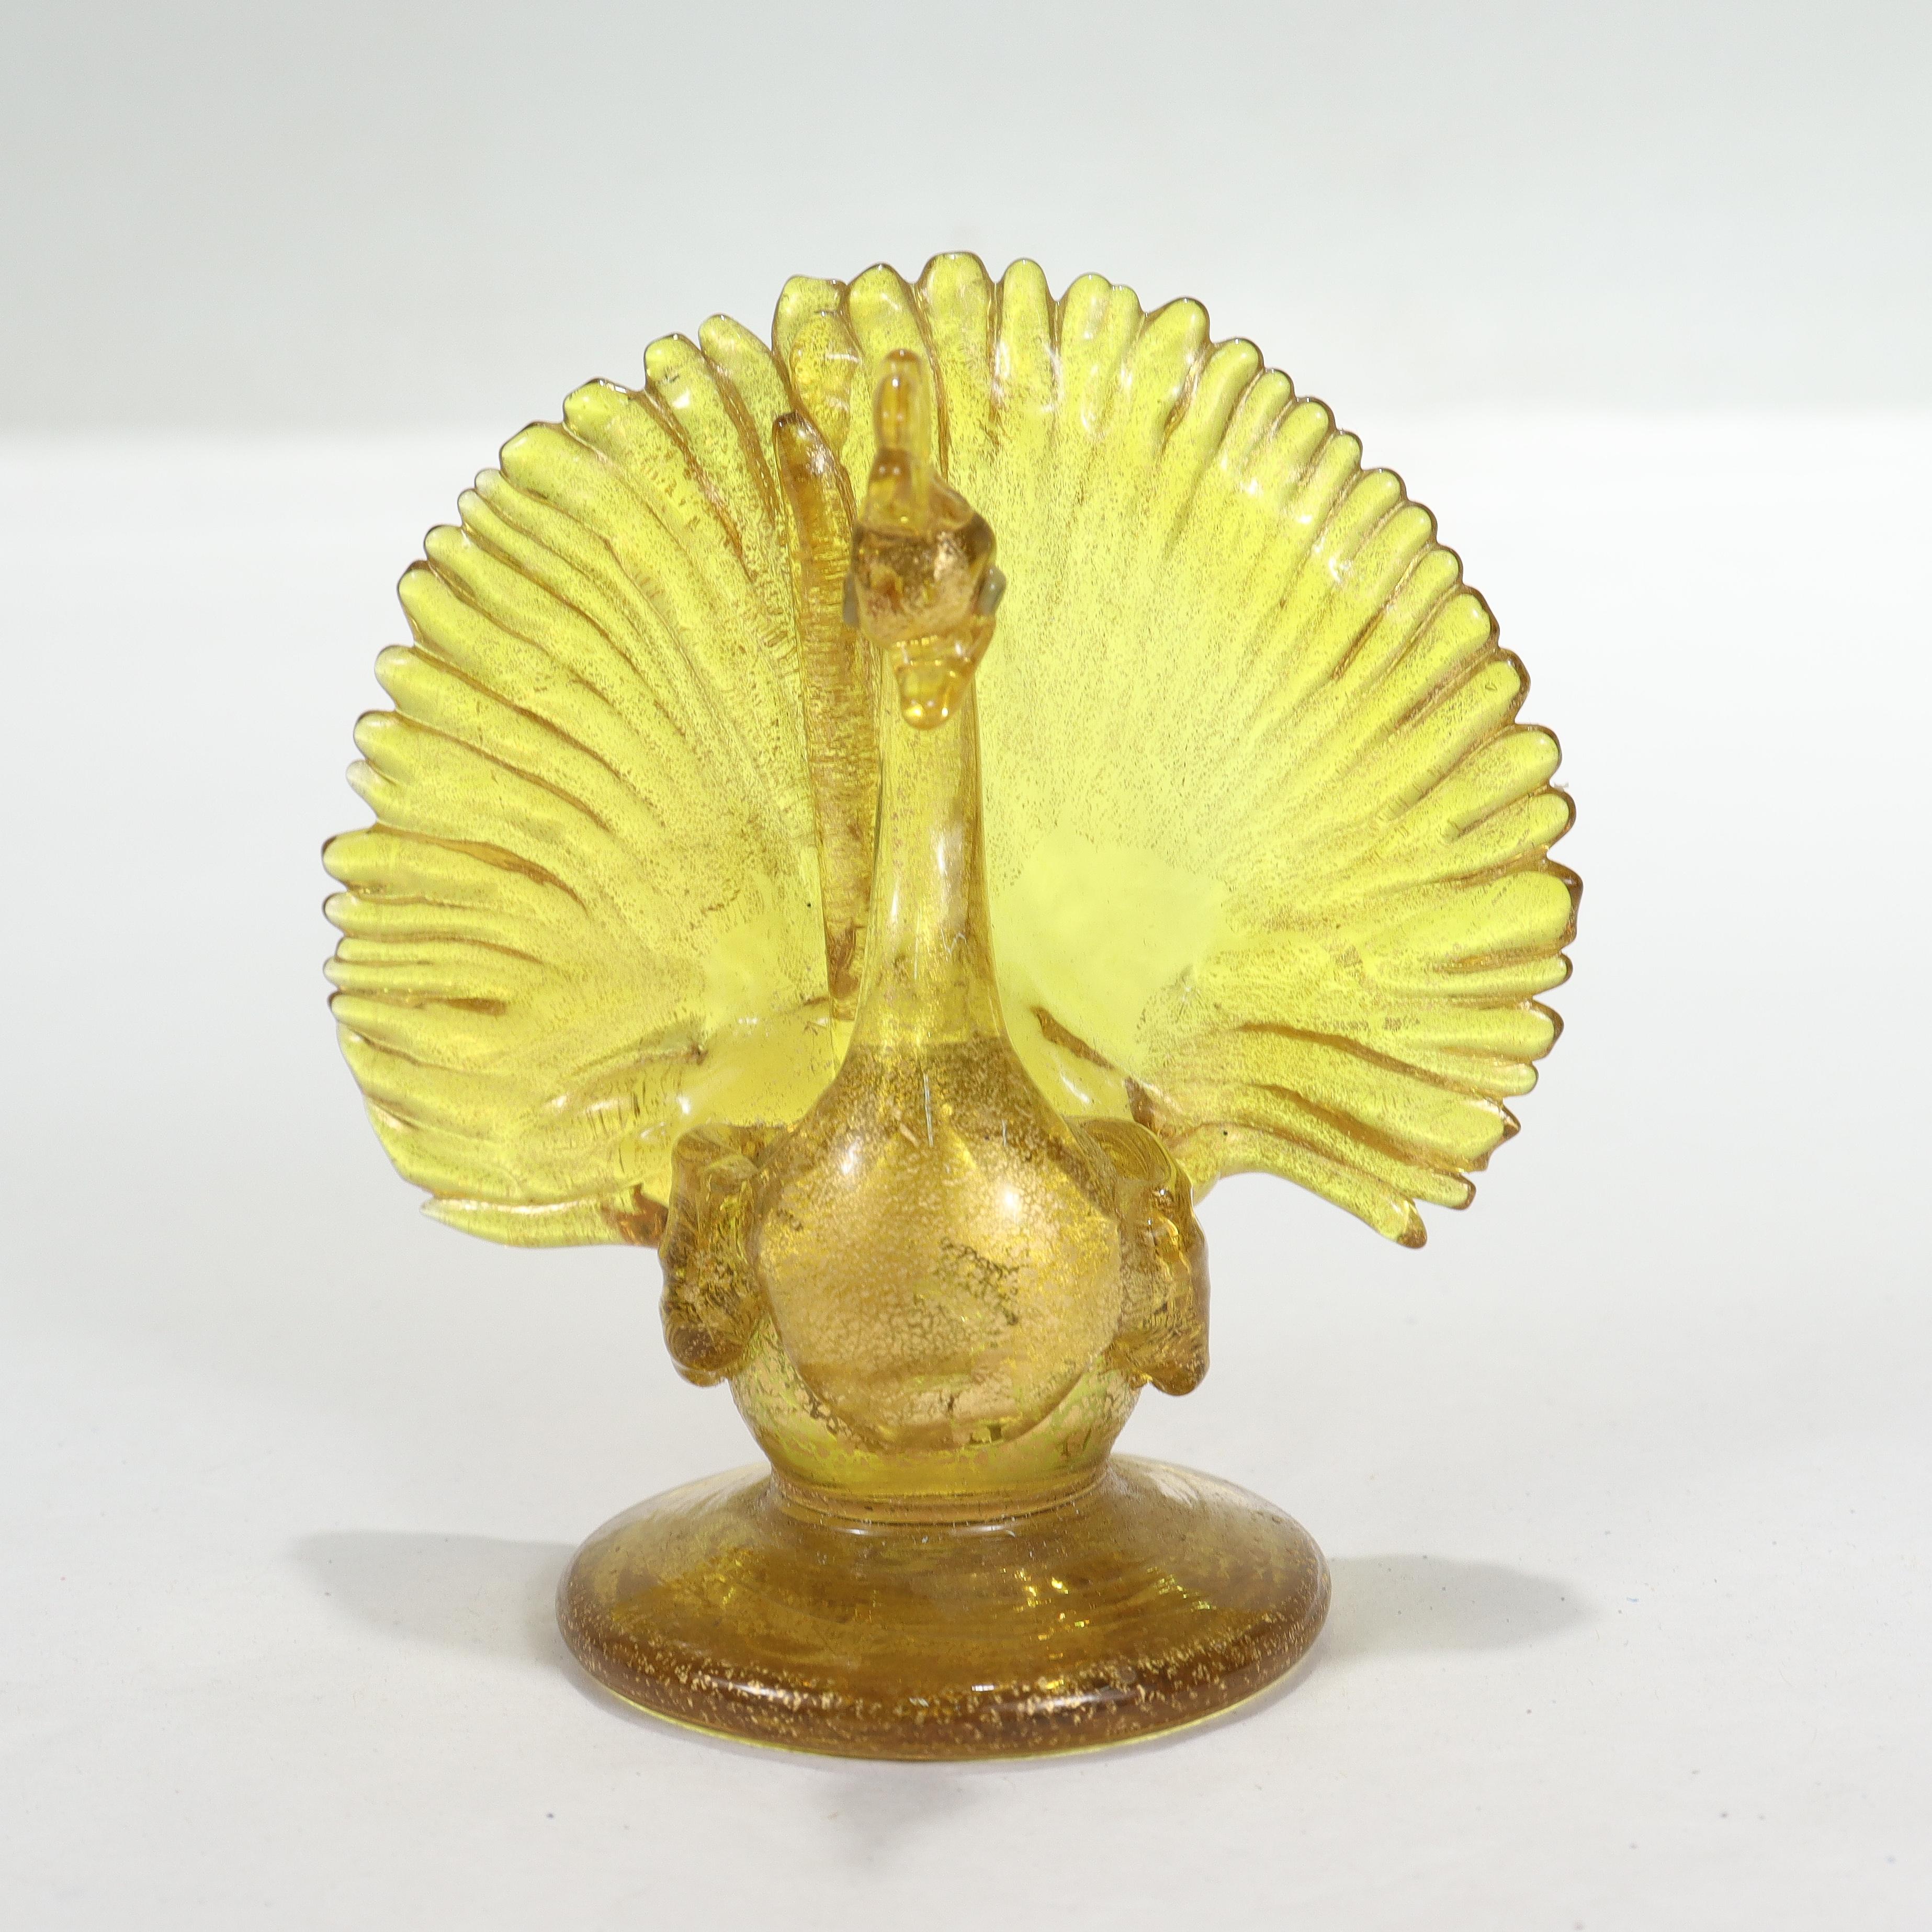 Salviati Attributed Venetian/Murano Glass Peacock Place Card Holder or Figurine In Good Condition For Sale In Philadelphia, PA